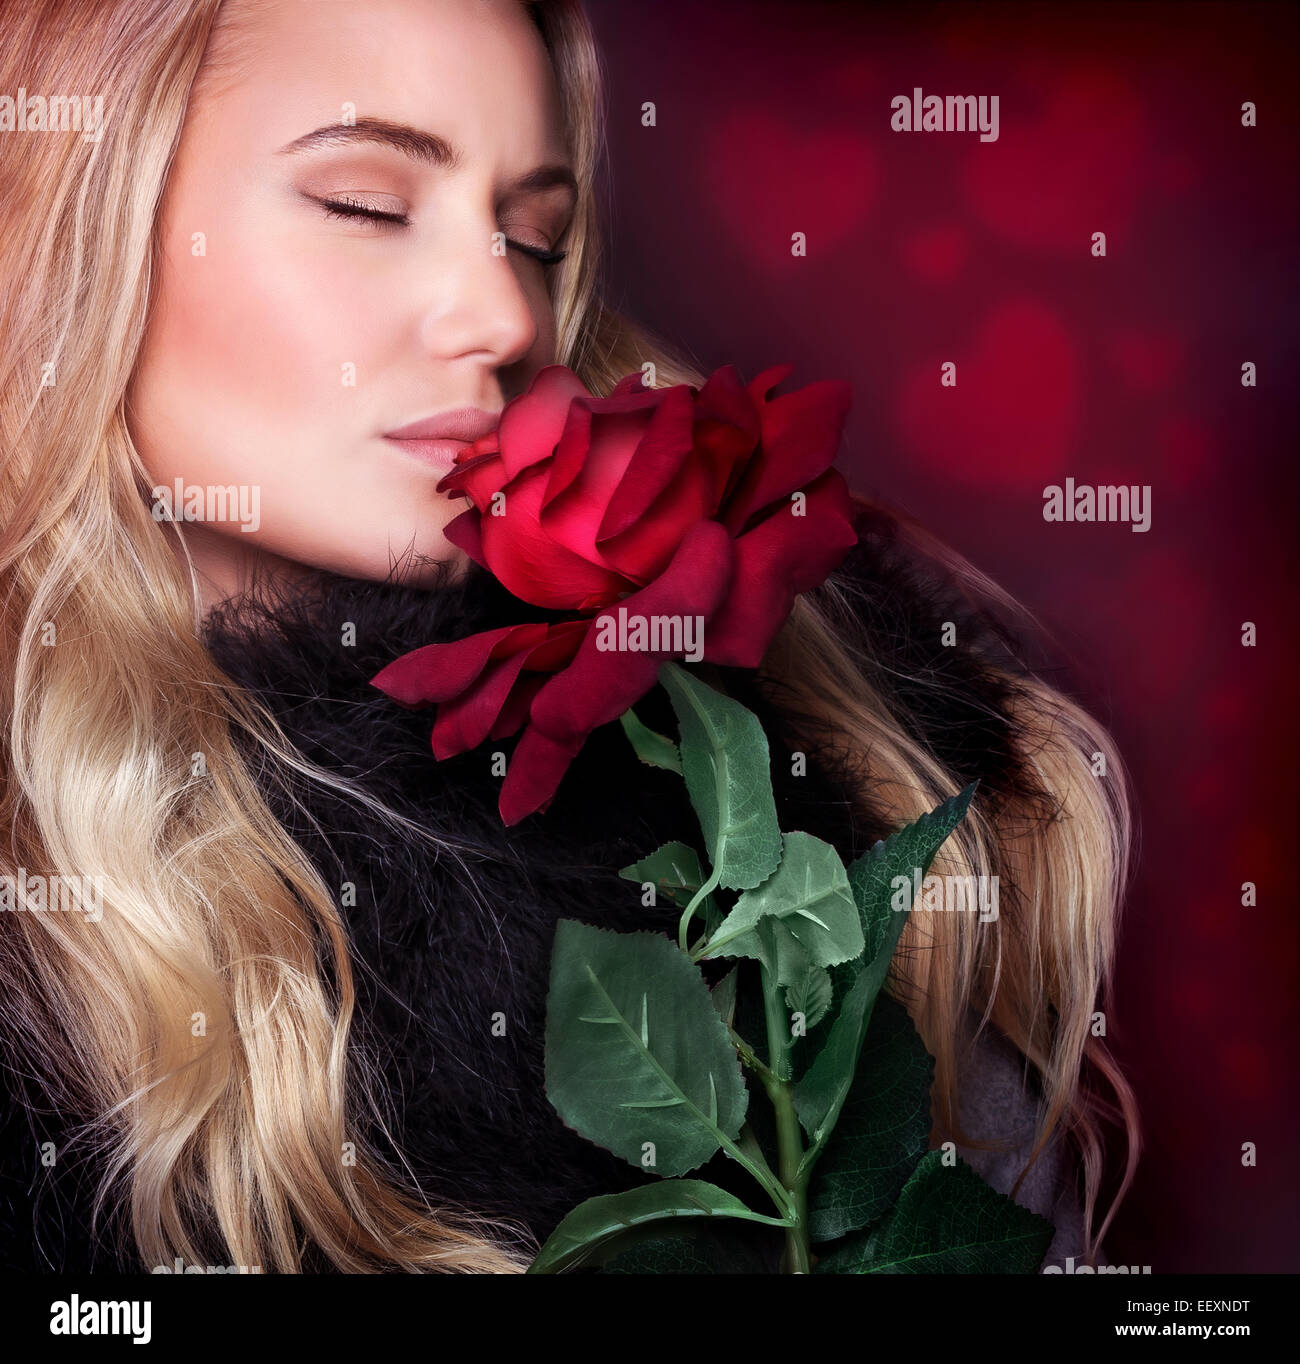 Closeup portrait of beautiful blond woman with closed eyes smelling fresh red rose on background with heart ornament Stock Photo